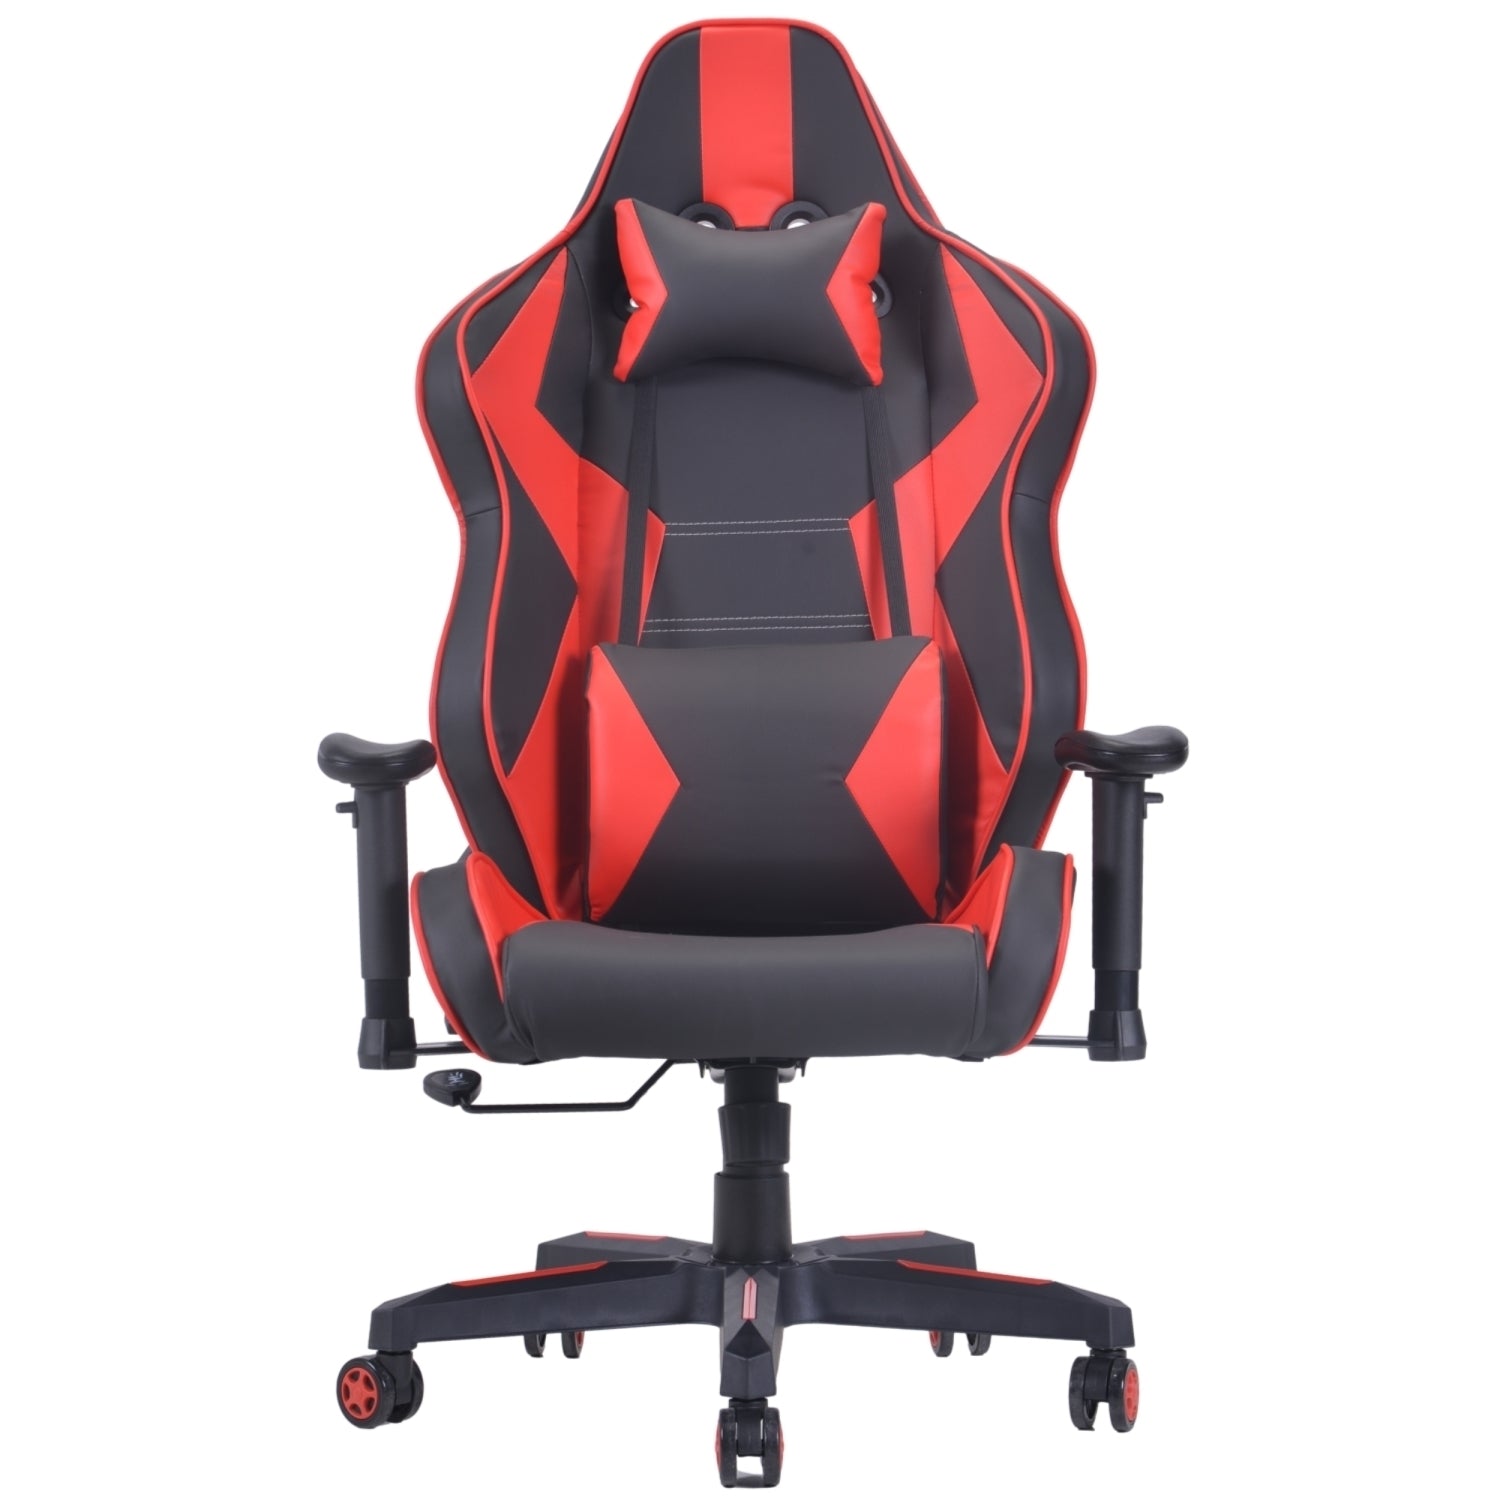 ViscoLogic METALLIC PRO Ergonomic Reclining Swivel Sports Style Home Office Computer Gaming Chair (Black & Red)